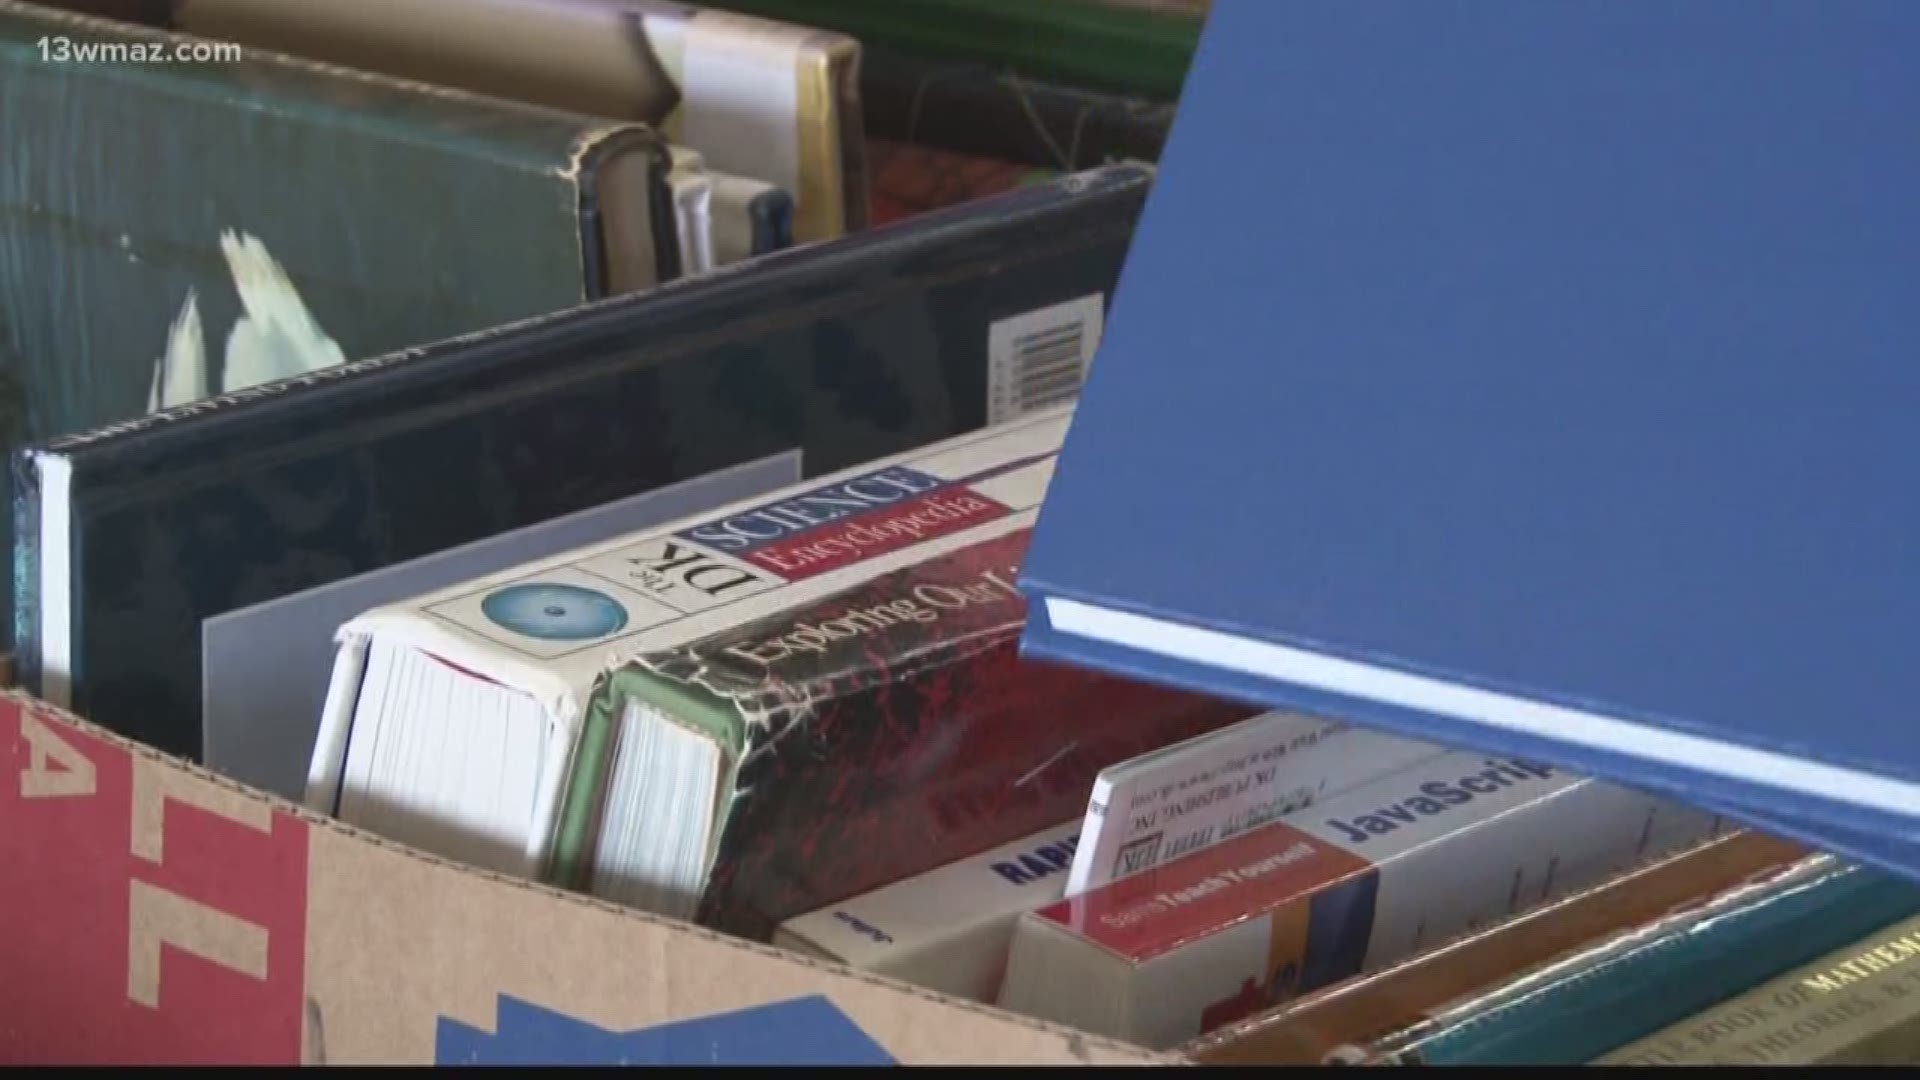 If you've been itching to get your hands on some new reading material, Macon-Bibb's Friends of the Library has got you covered with their annual Fall Book Sale.